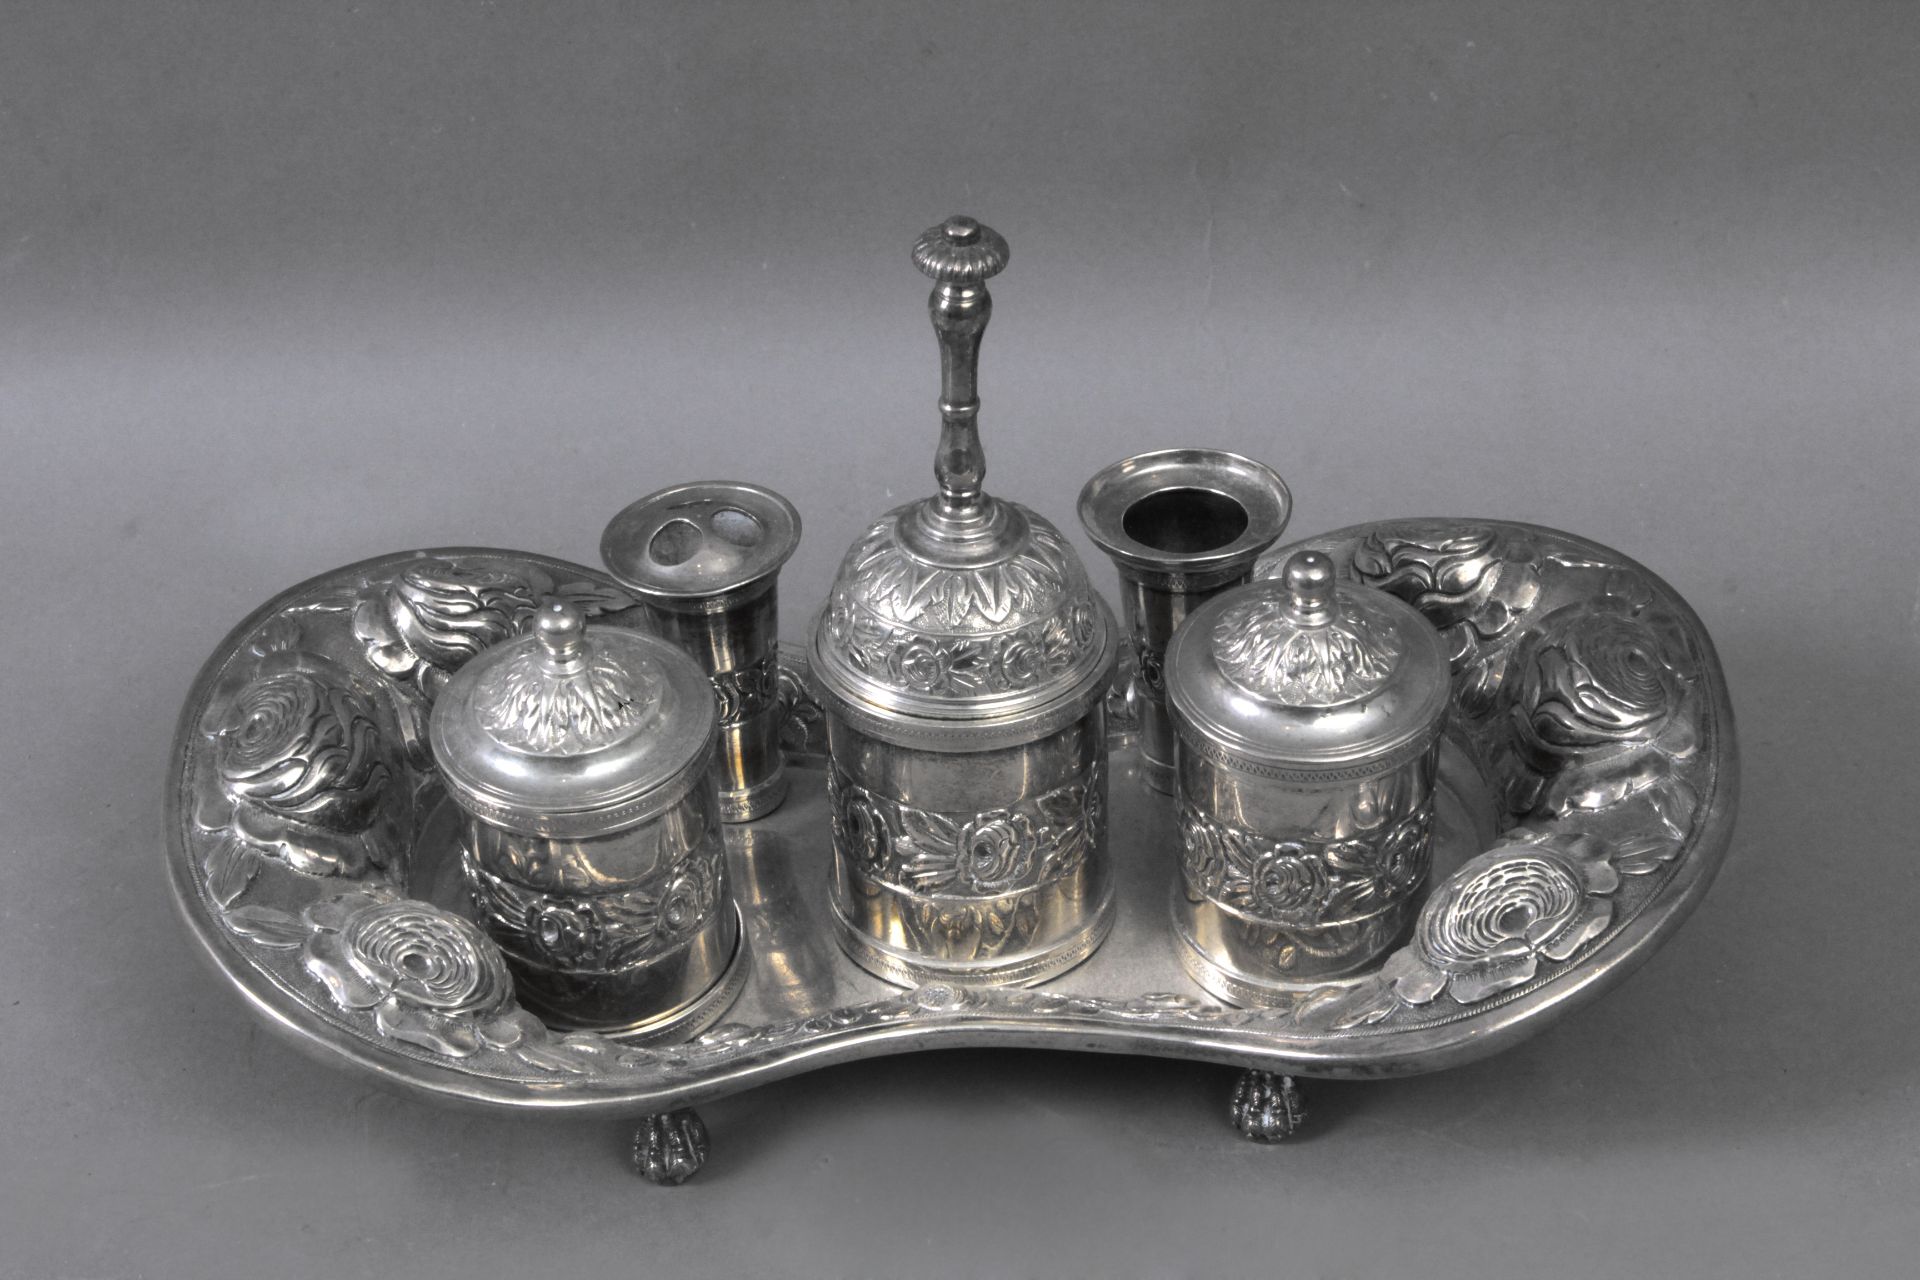 A late 18th century Spanish silver inkstand